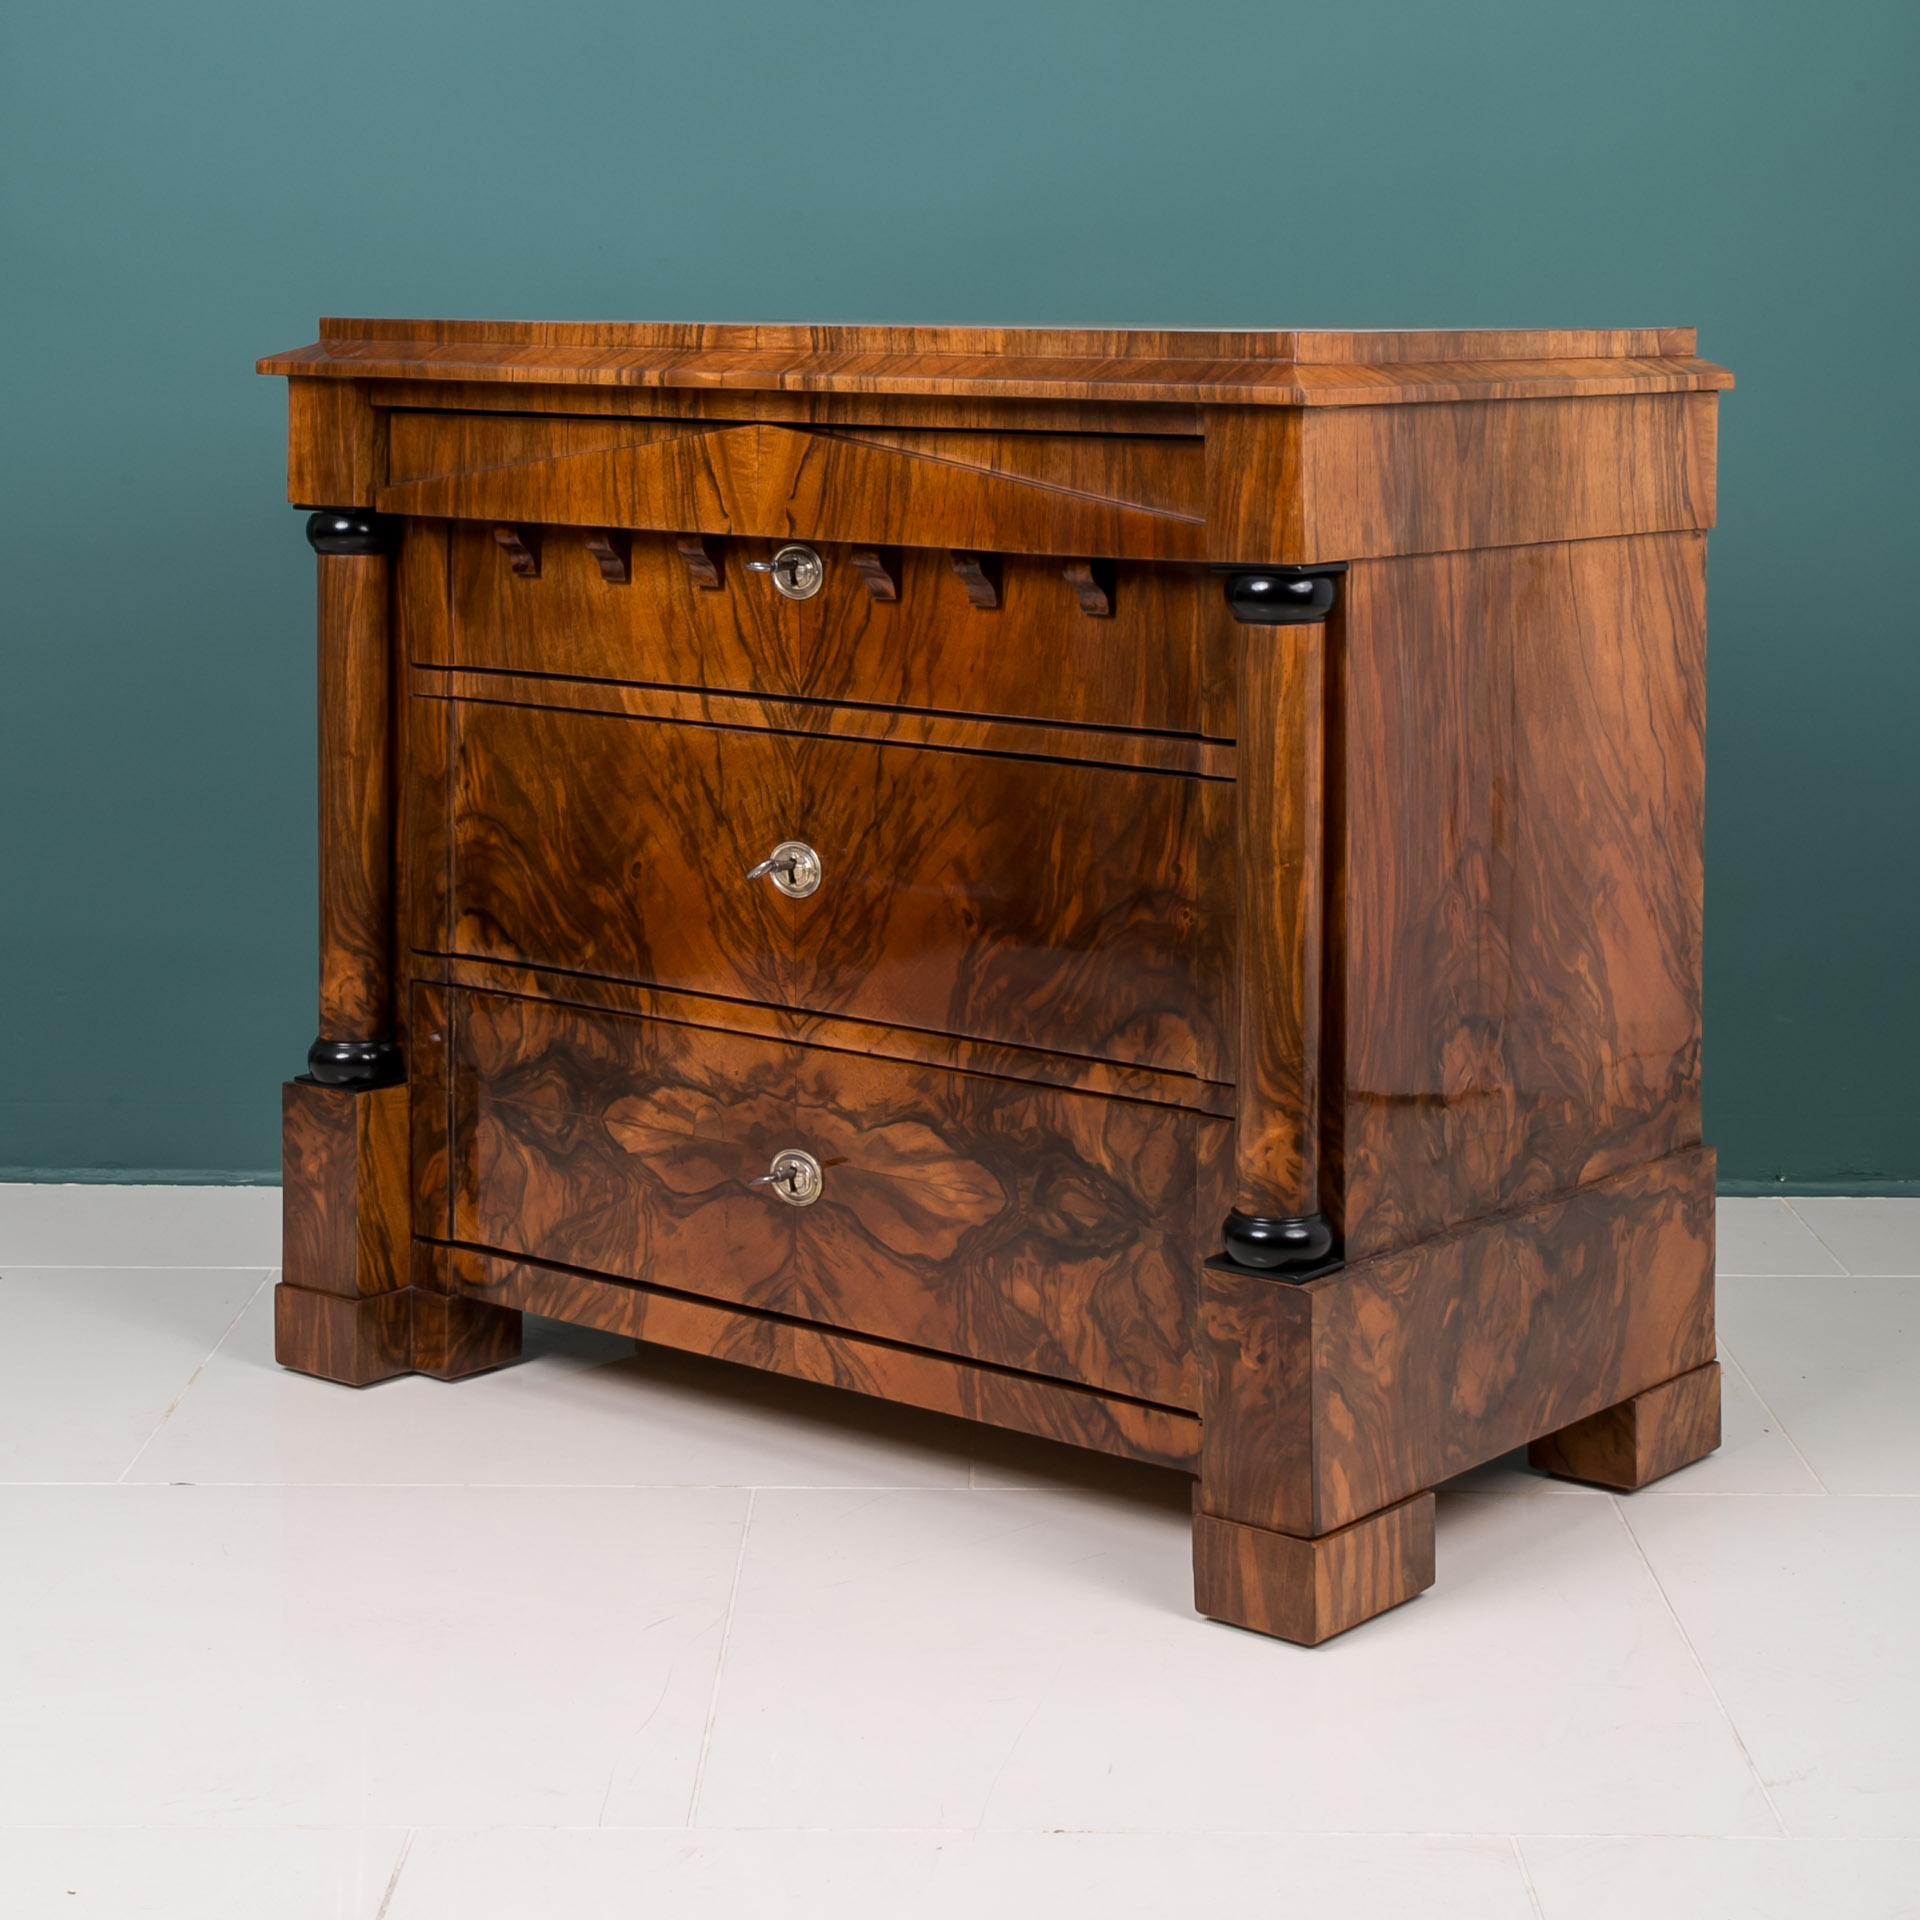 Biedermeier style chest of drawers from 19th century. This piece of furniture comes from Germany. It was made of coniferous wood and veneered with beautiful walnut wood. It features 3 spacious drawers. The chest of drawers has undergone a complete